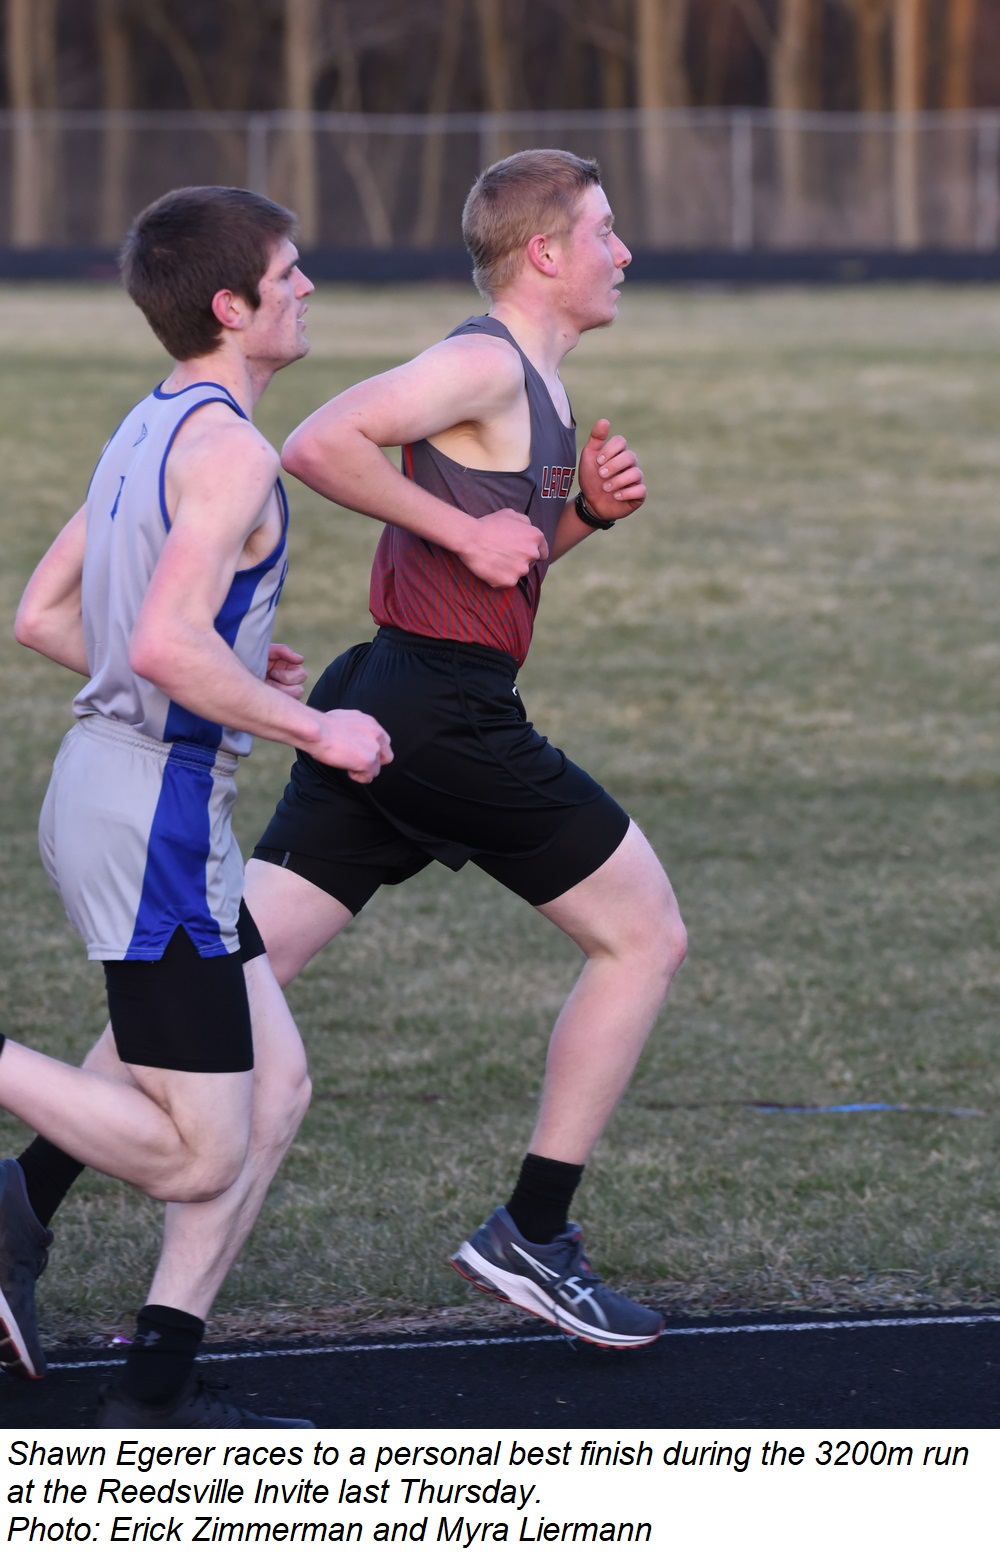 Shawn Egerer races to a personal best finish during the 3200m run at the Reedsville Invite Thursday.